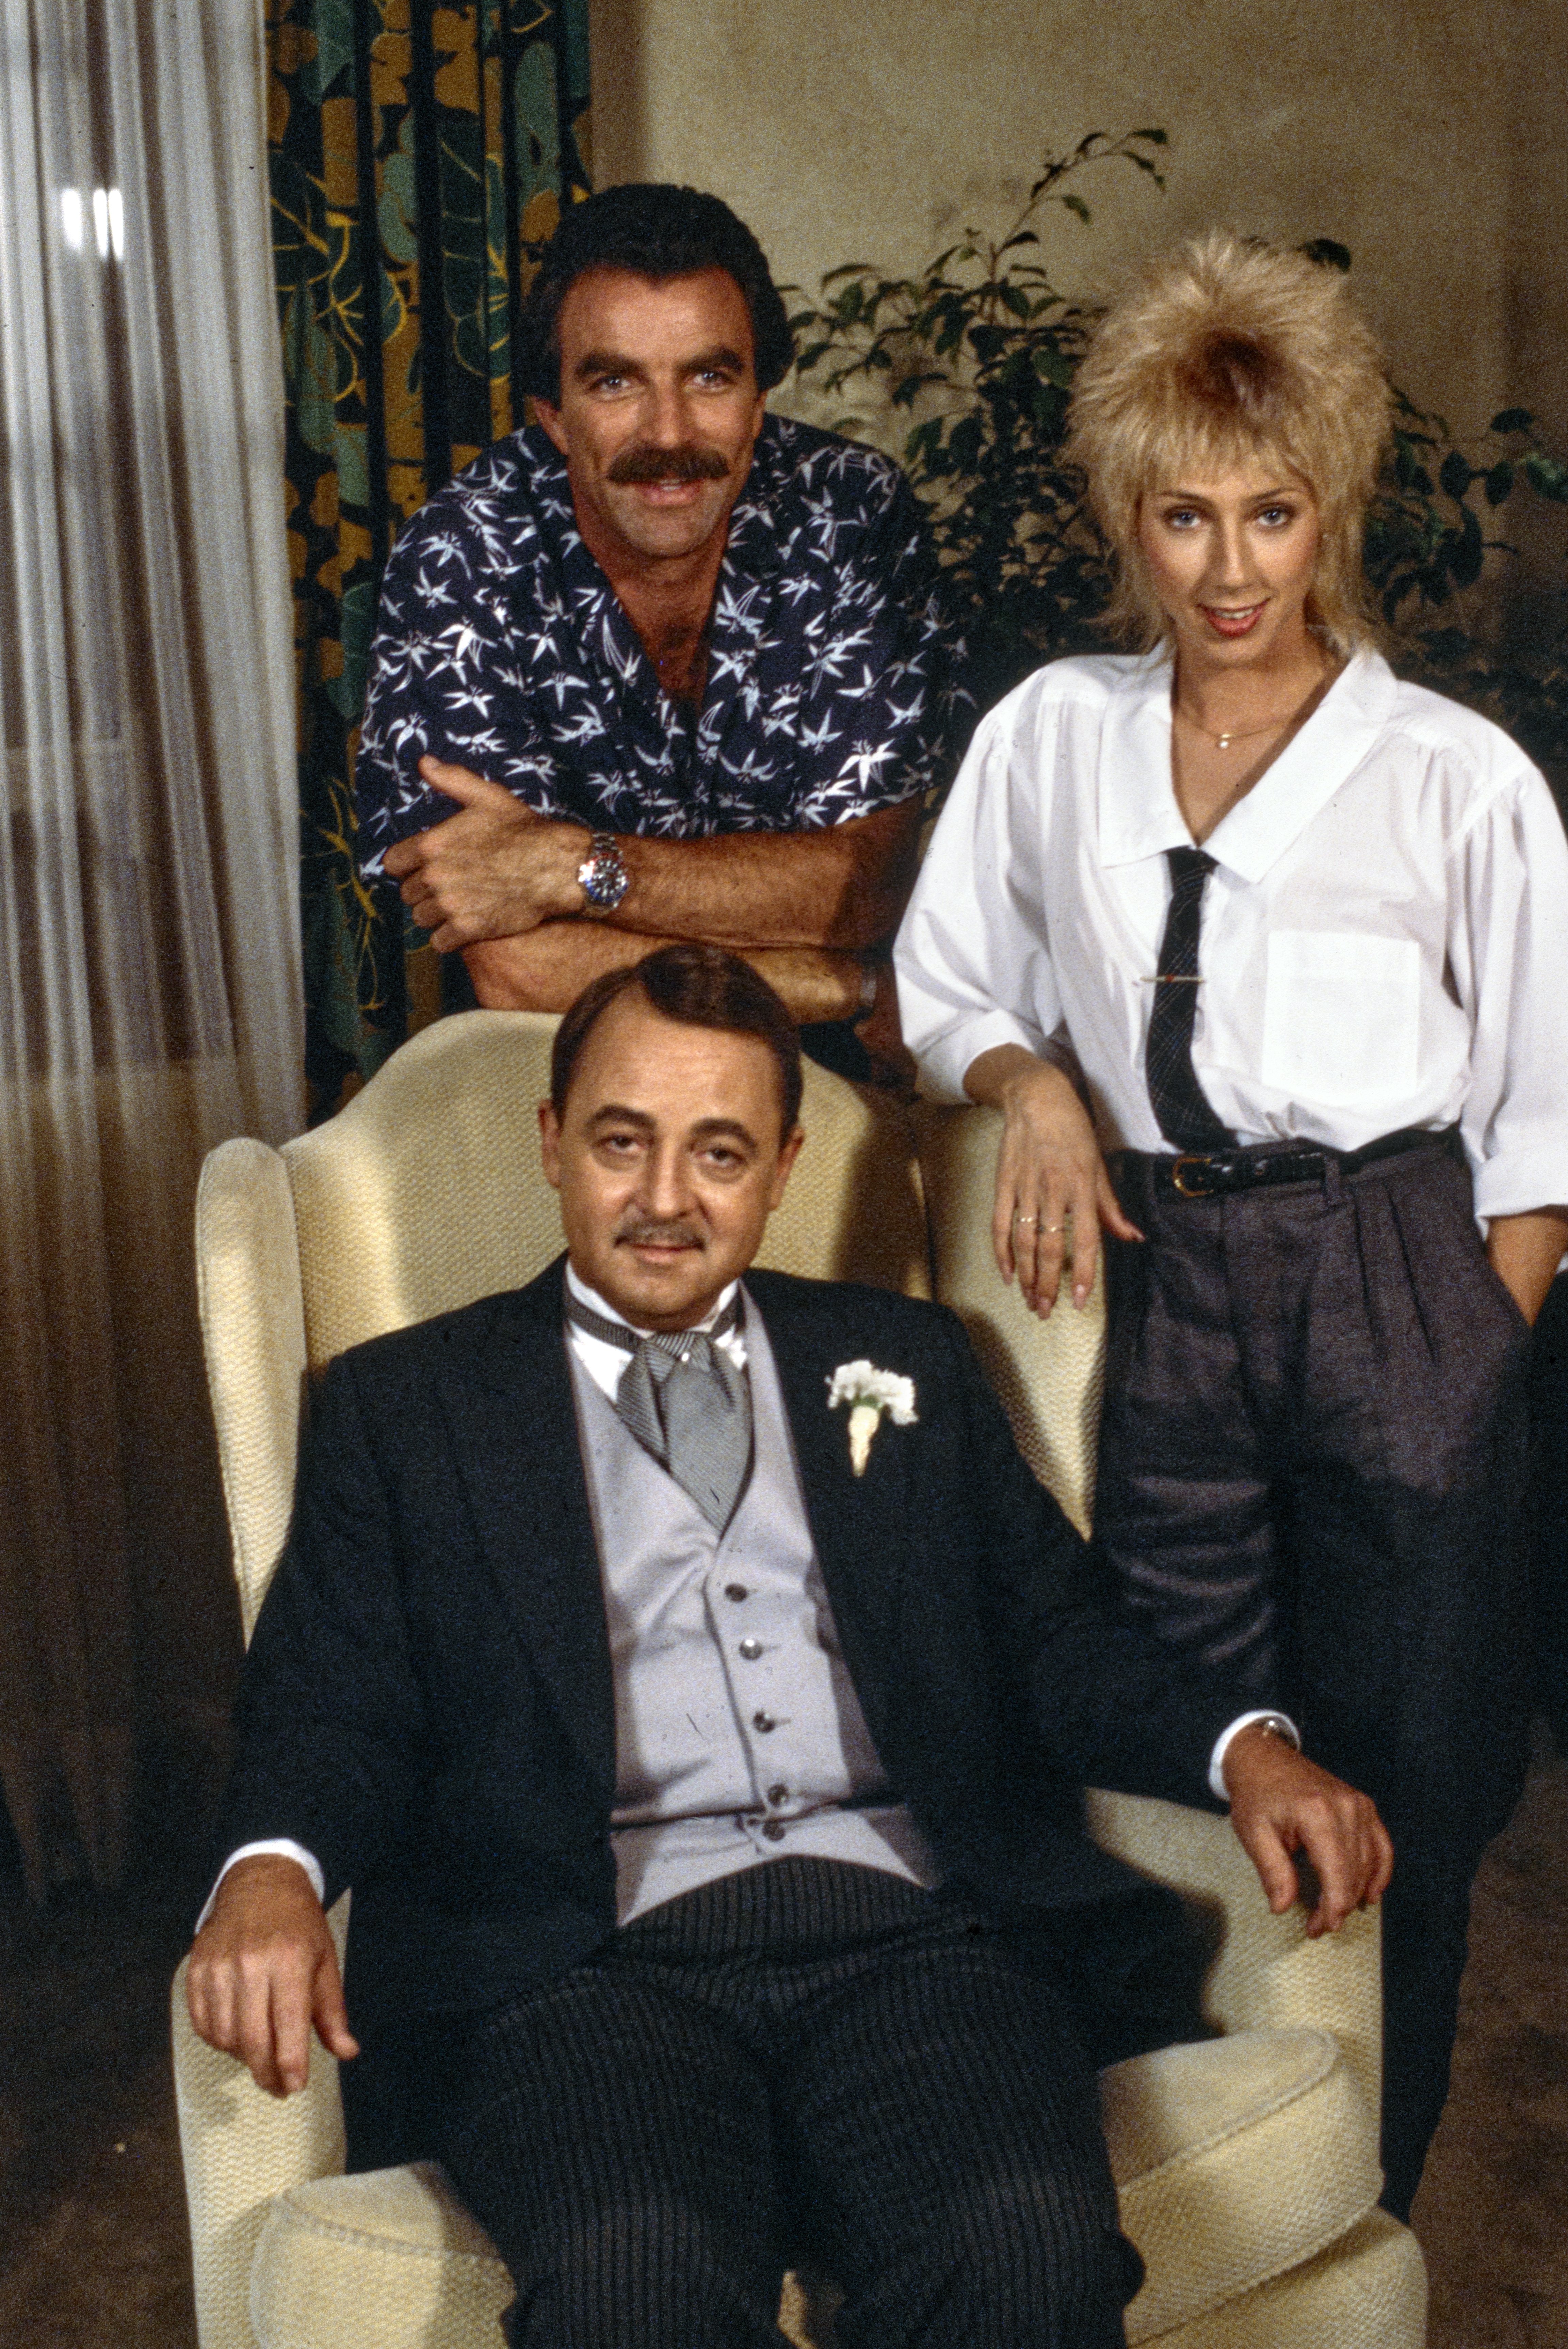 Tom Selleck (as Magnum), Jillie Mack (as Sally Ponting), and seated is John Hillerman (as Higgins) in the MAGNUM PI episode, "Professor Jonathan Higgins," which aired January 10, 1985. | Photo: Getty Images